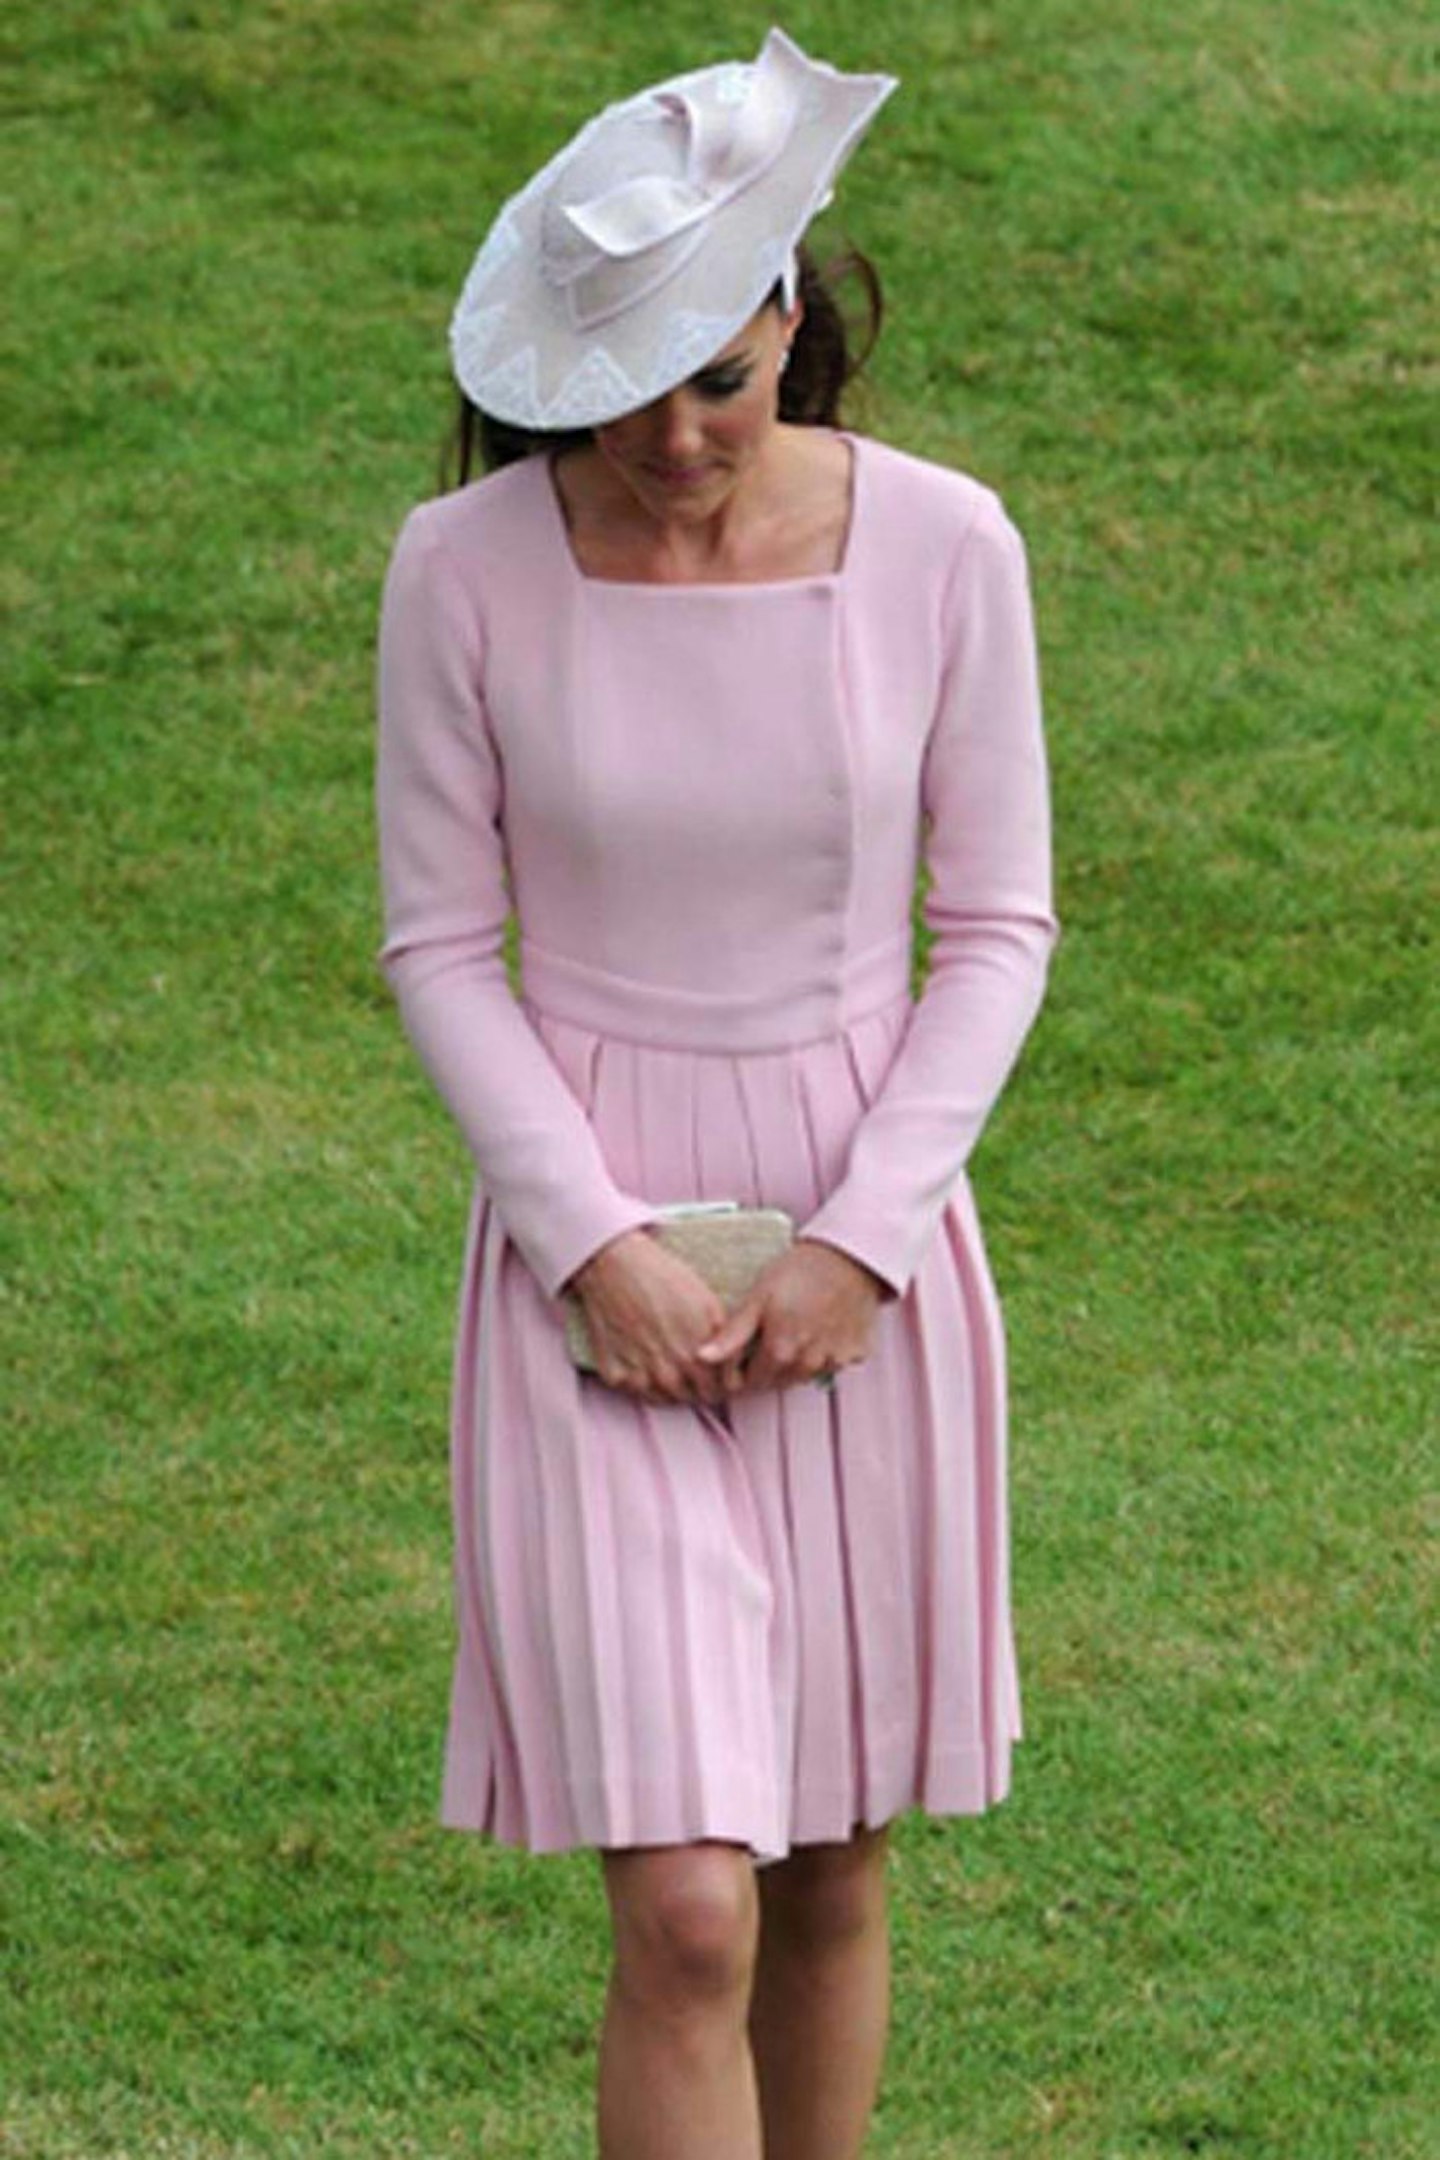 Kate Middleton in Emilia Wickstead at The Buckingham Palace Garden Party, 29 May 2012